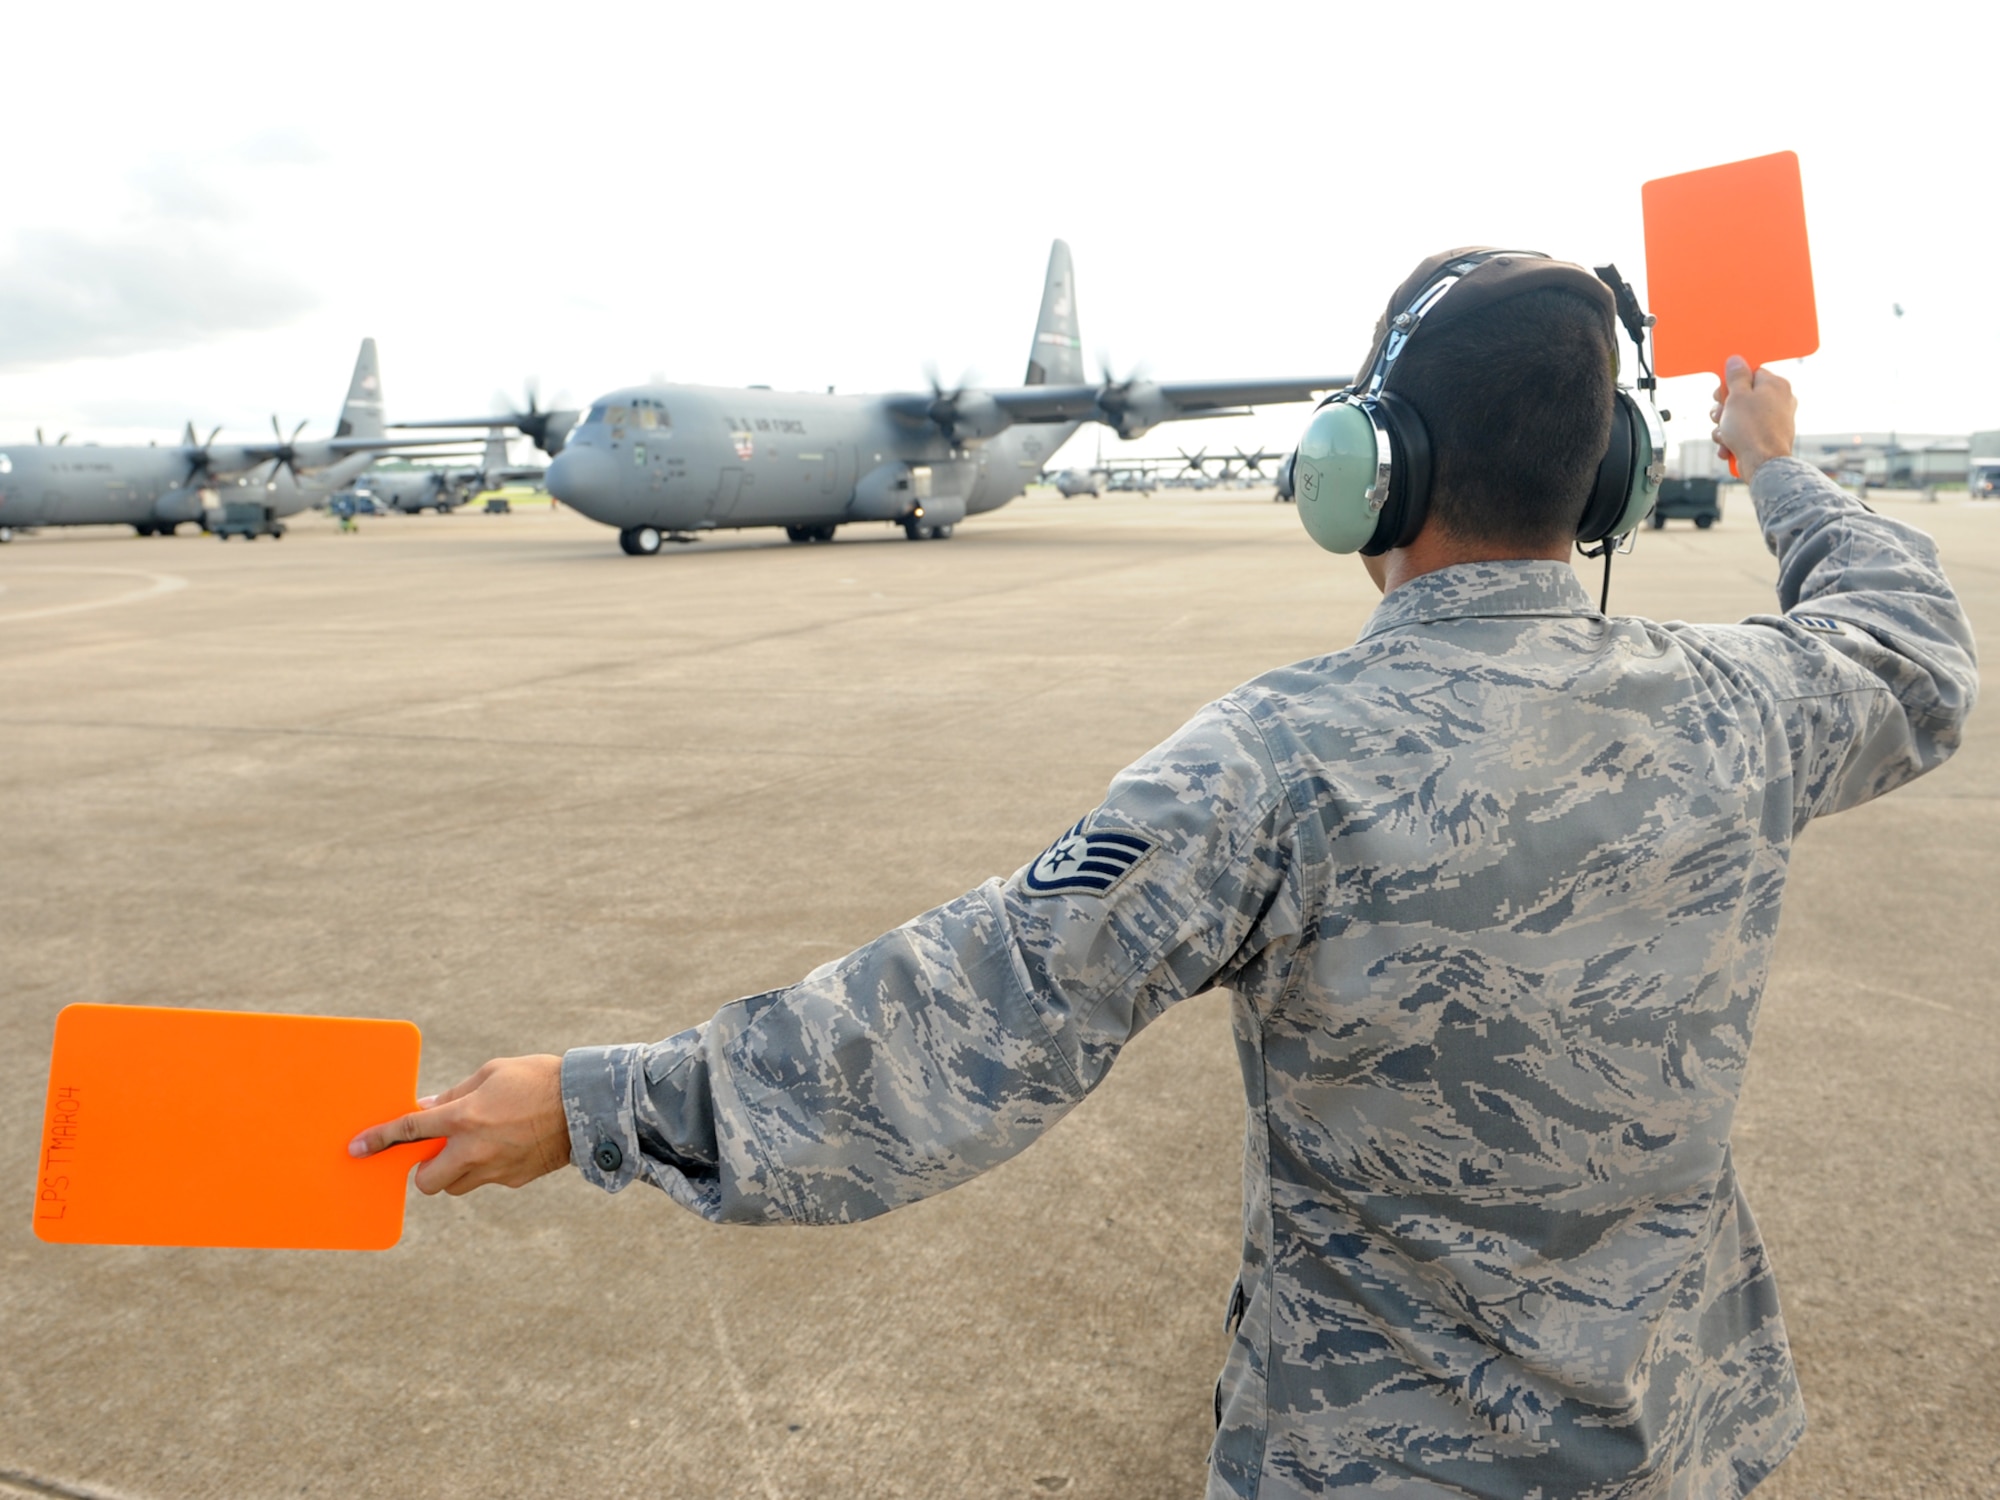 LITTLE ROCK AIR FORCE BASE, Ark. -- Staff Sgt. Fabian Balderrama, 19th Aircraft Maintenance Squadron crew chief, marshals a C-130J carrying the 19th Airlift Wing Rodeo team here July 17. (U. S. Air Force photo by Senior Airman Jim Araos)